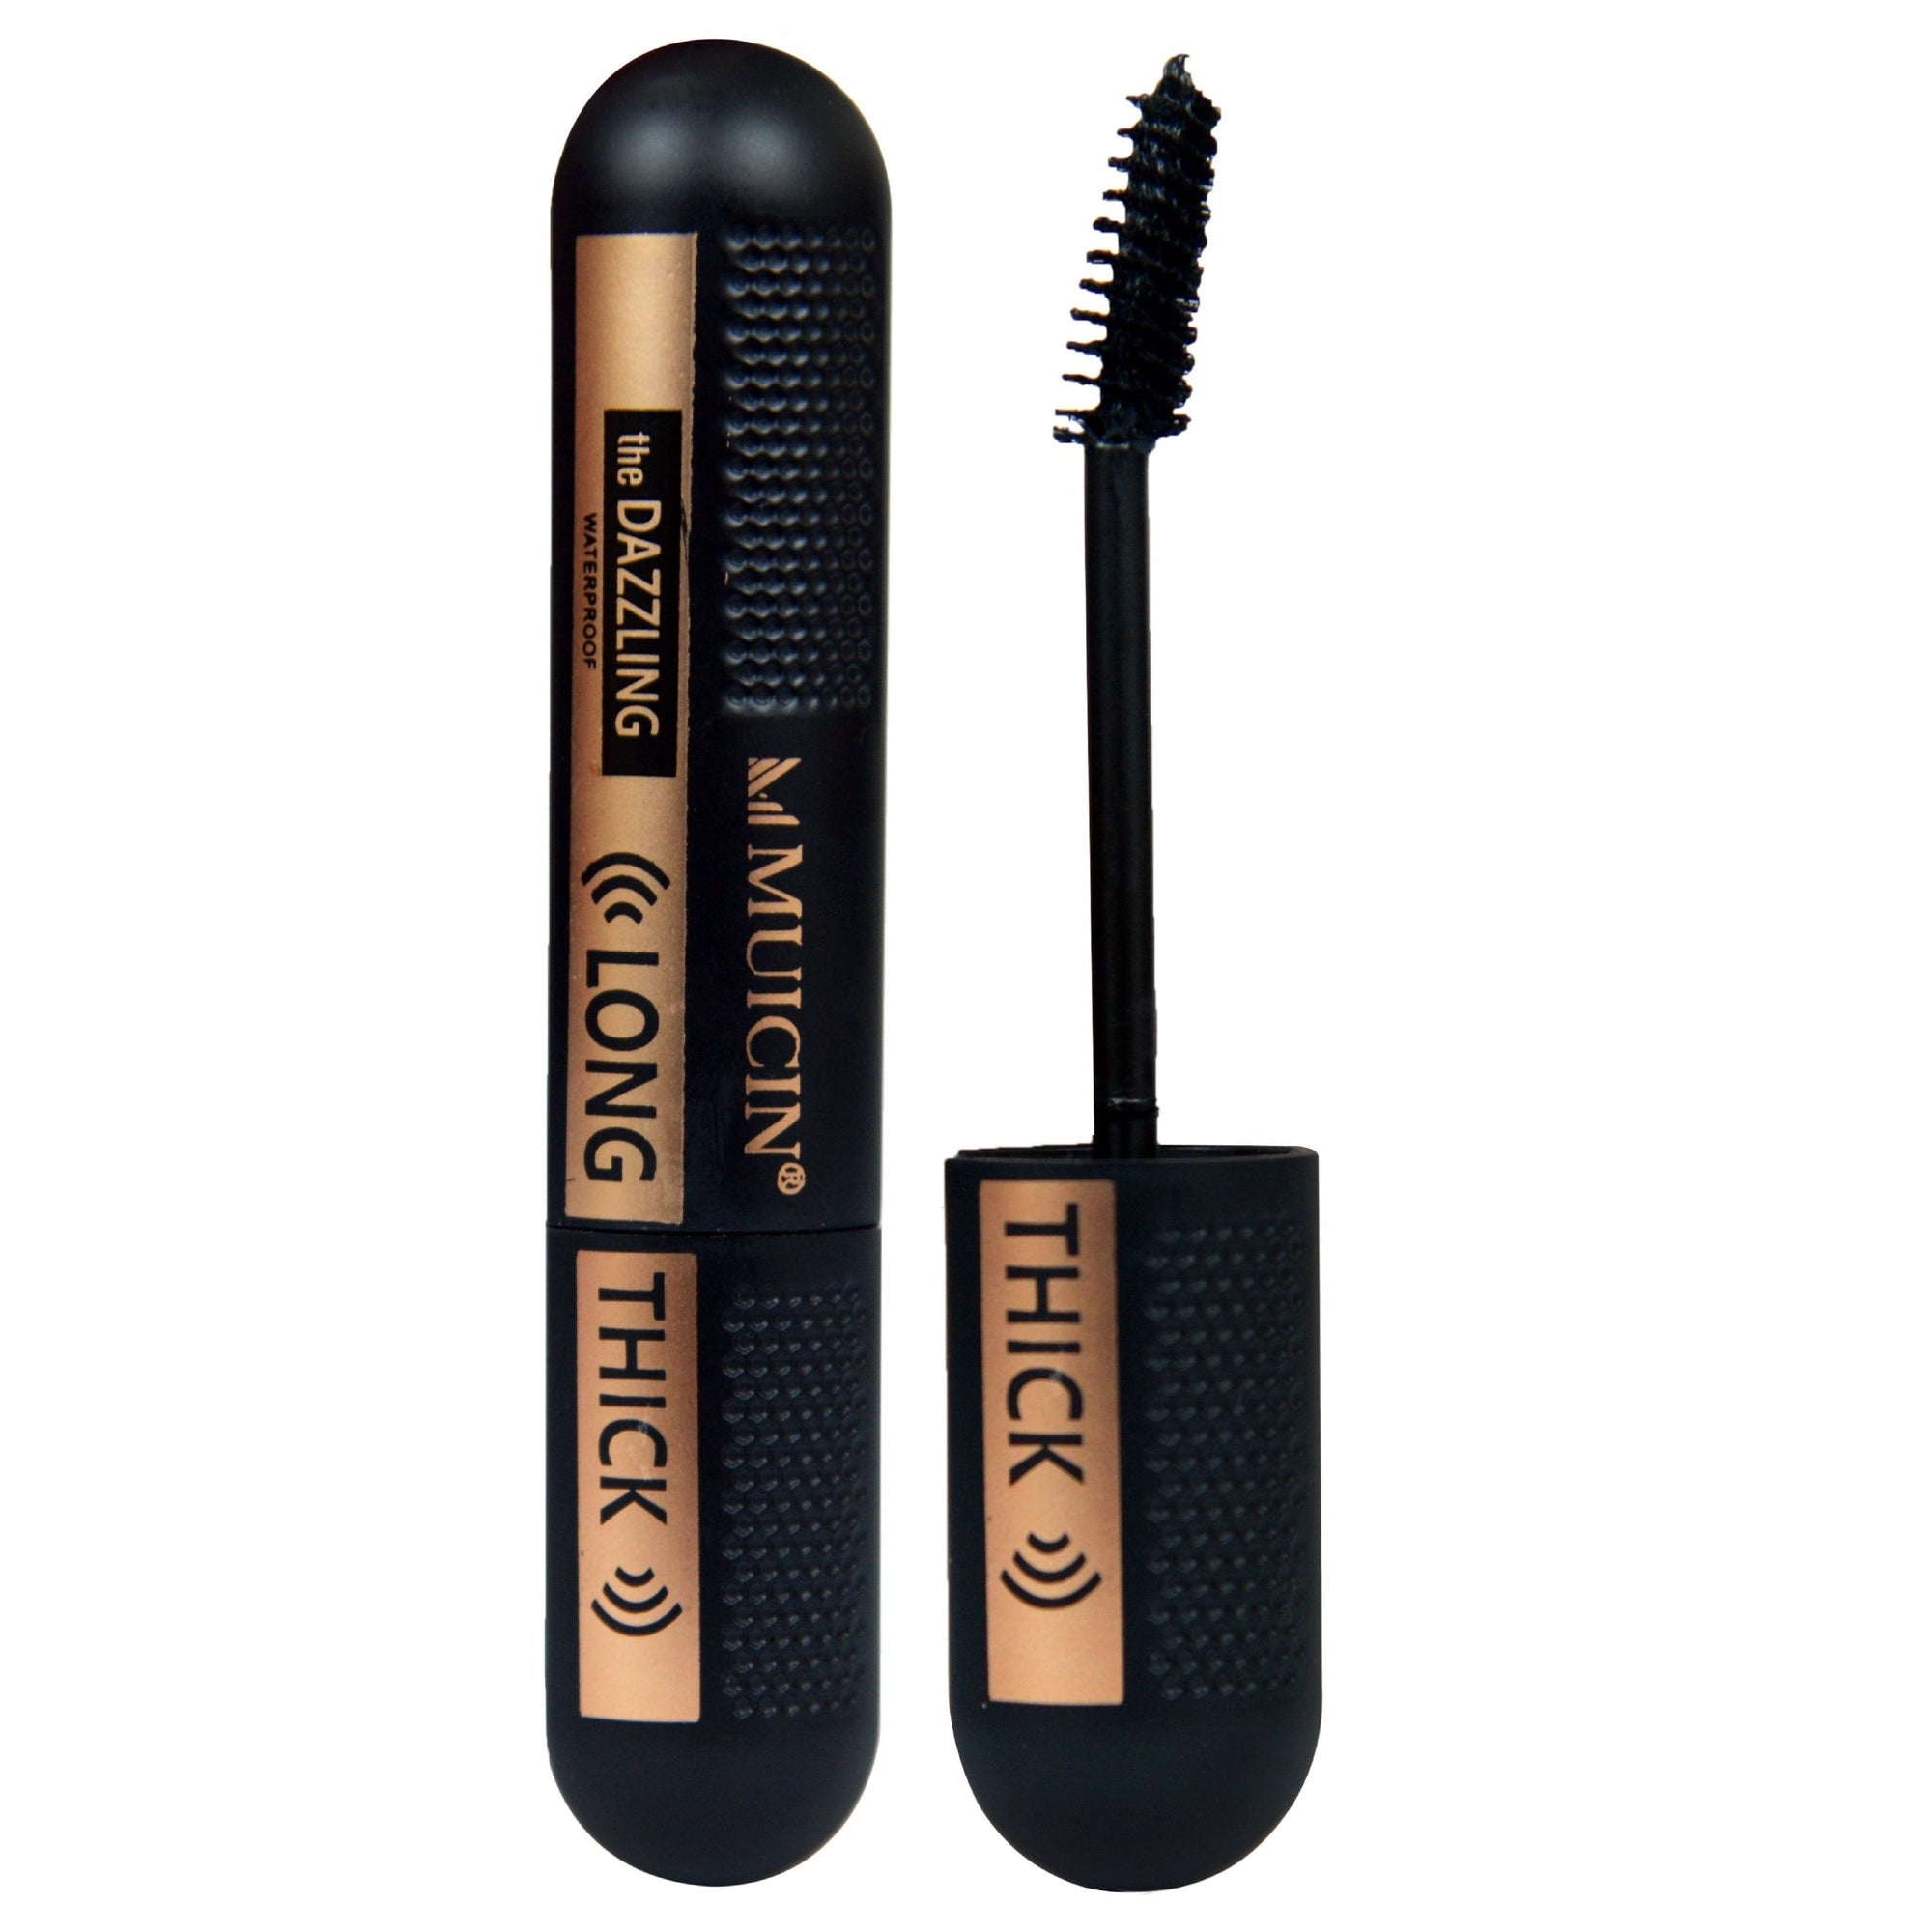 Buy  MUICIN - The Dazzling Long Thick Volume Mascara - Black at Best Price Online in Pakistan